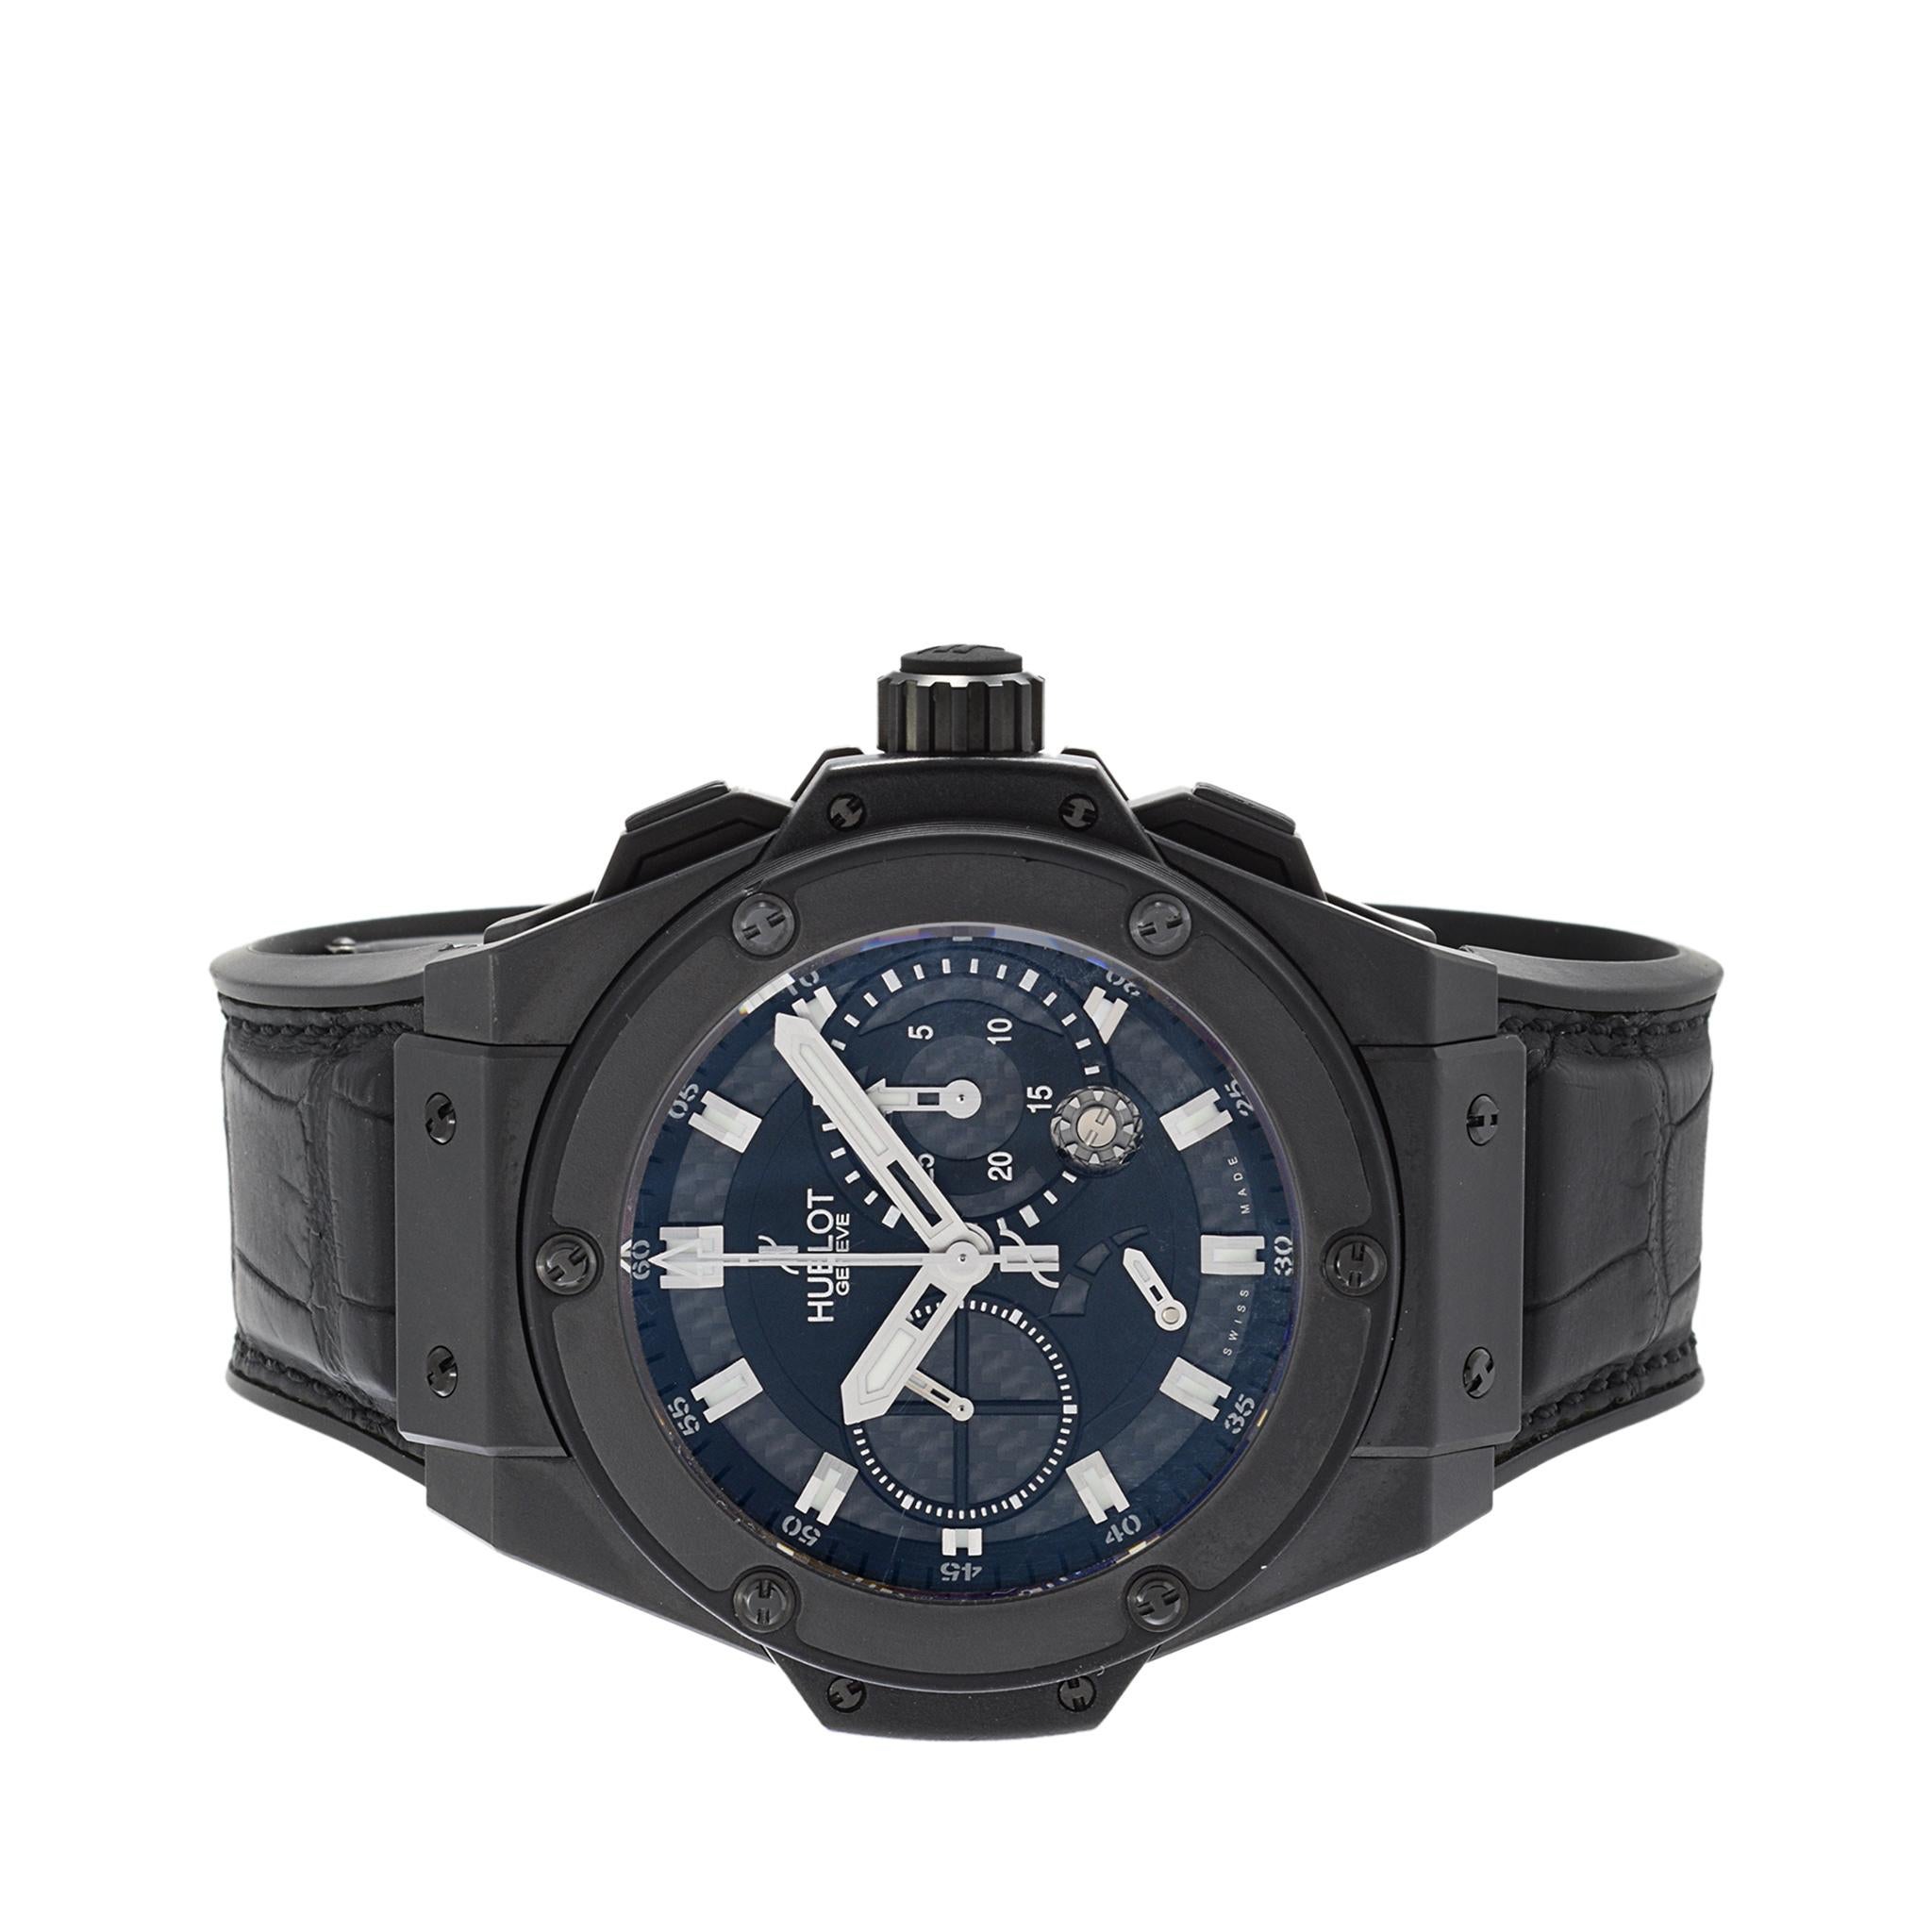 Hublot Big Bang King Power Limited Edition In Excellent Condition For Sale In New York, NY